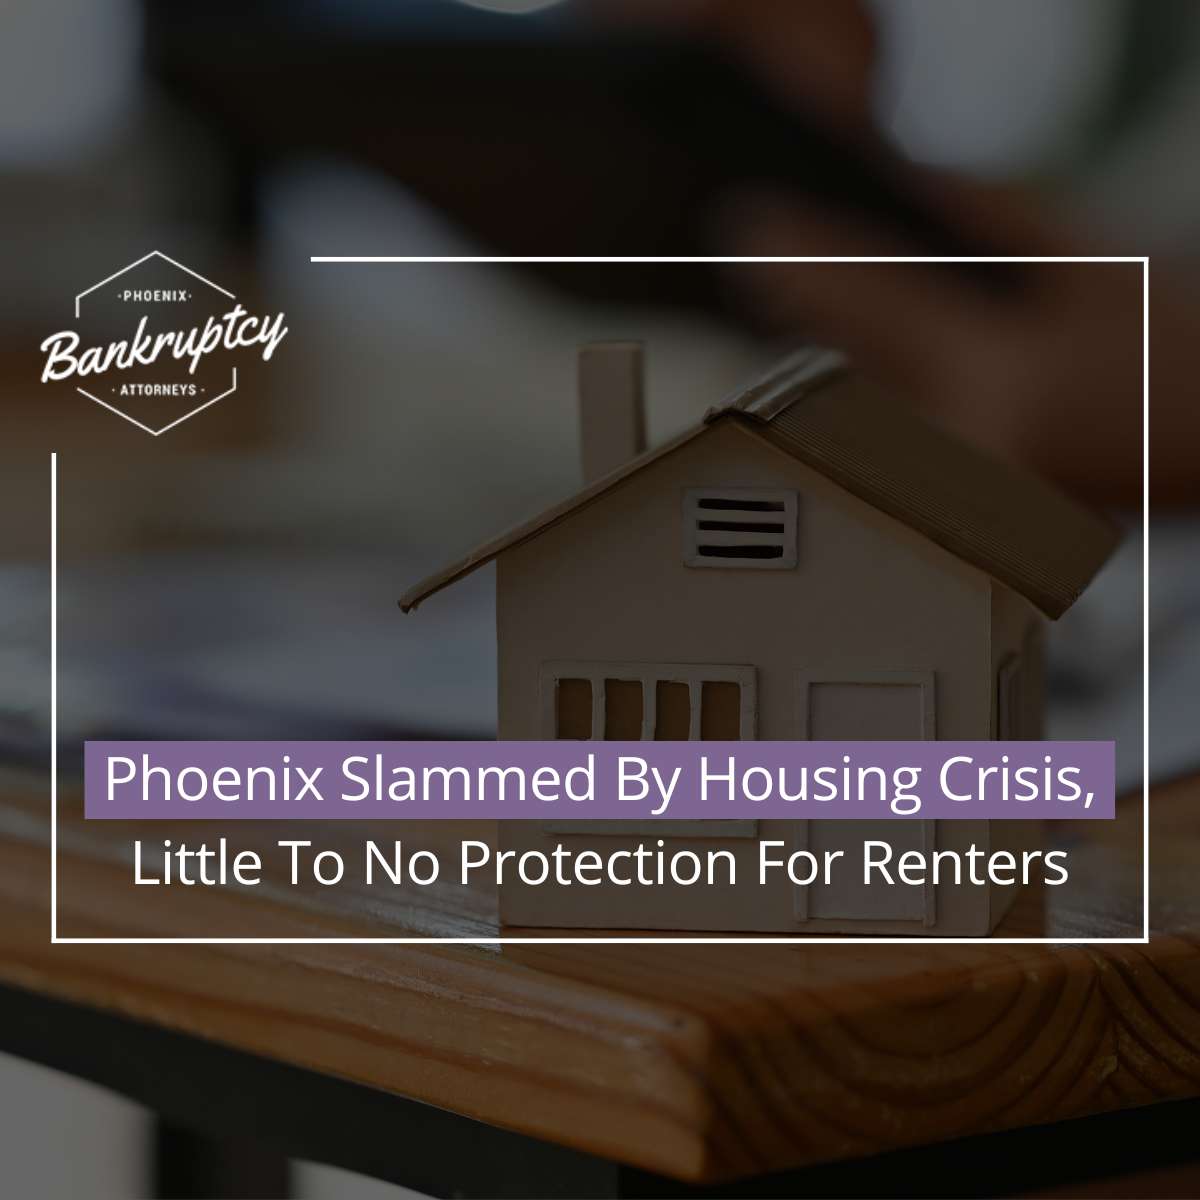 Phoenix Slammed by Housing Crisis, Little to No Protection For Renters